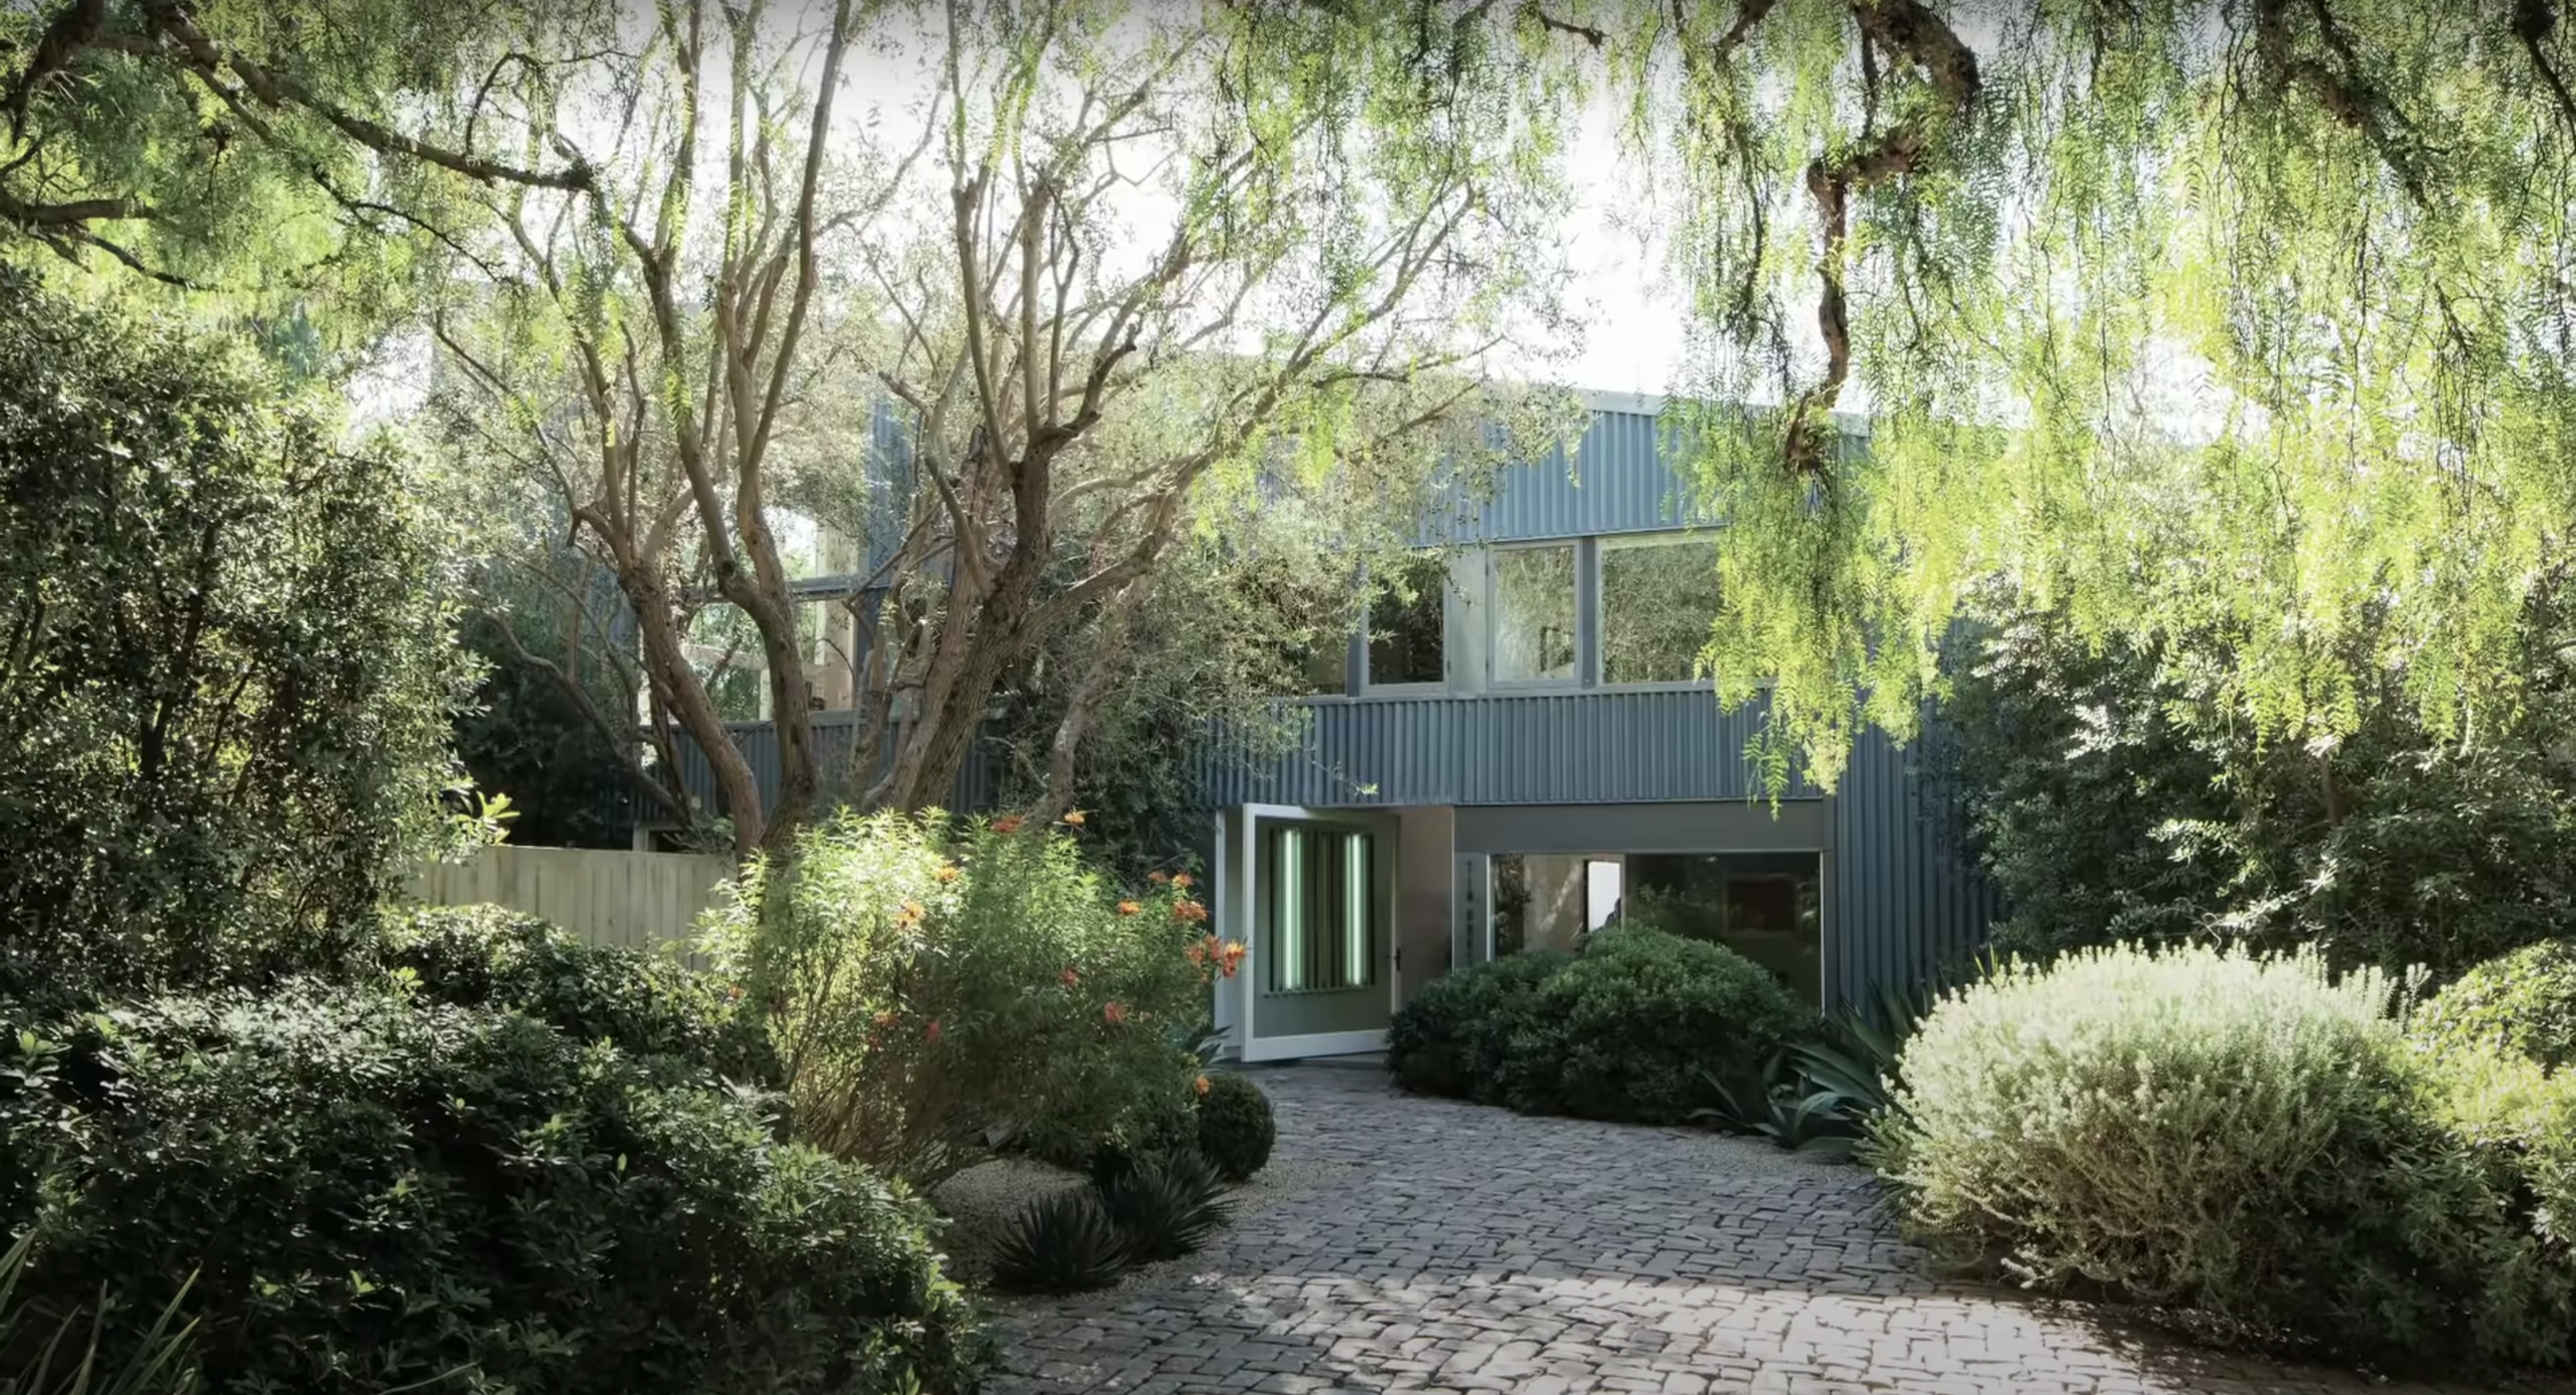 Patrick Dempsey's former Malibu home from a video dated October 29, 2014 | Source: youtube.com/@Archdigest